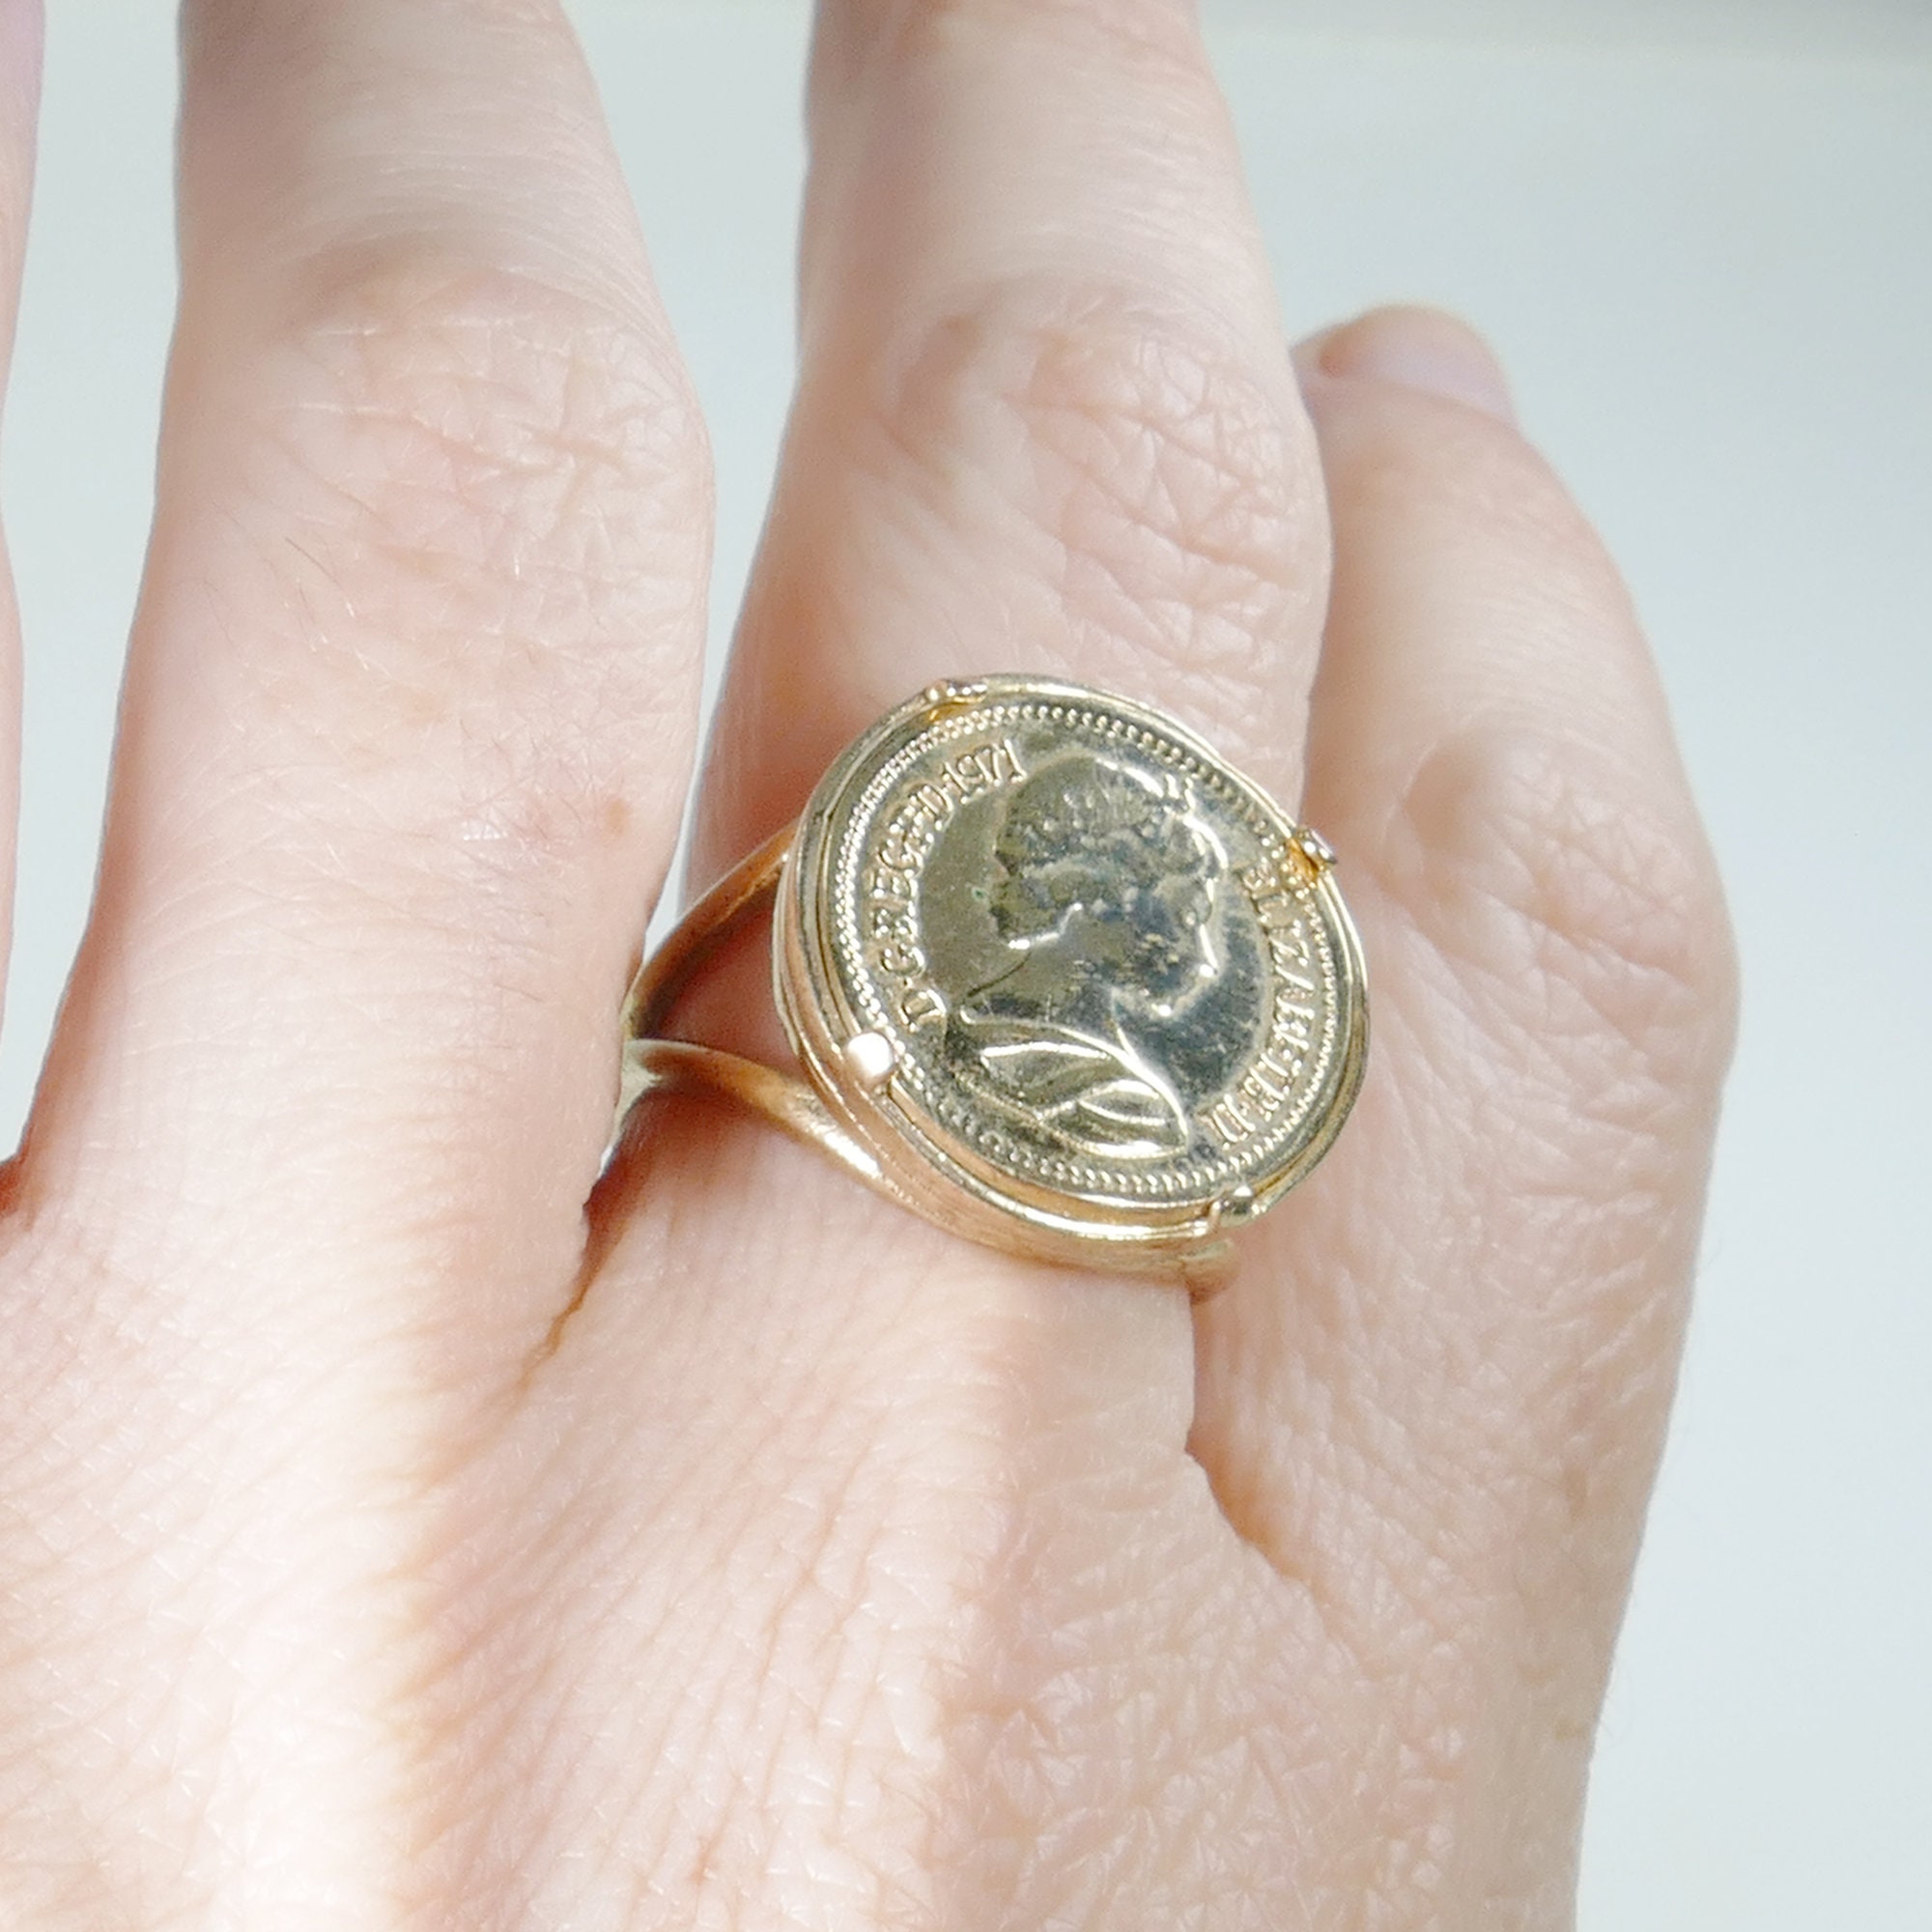 Queen Elizabeth 14k Gold Coin Ring W/ 1971 Coin | lupon.gov.ph